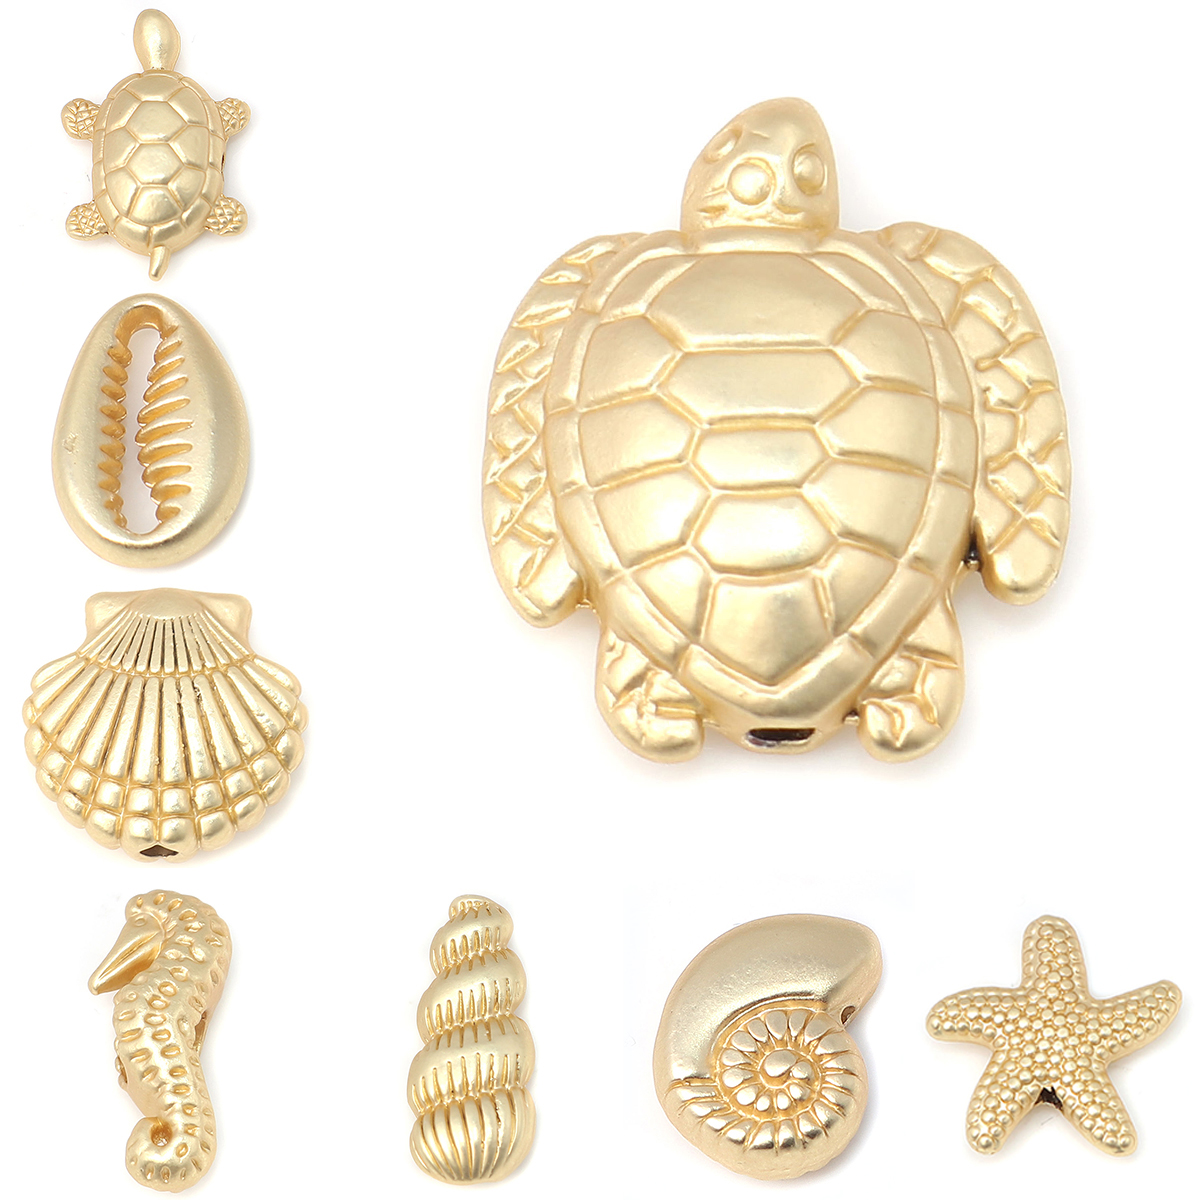 Picture of Zinc Based Alloy Ocean Jewelry Beads Shell Matt Real Gold Plated 9mm x 8mm, Hole: Approx 1.4mm, 10 PCs